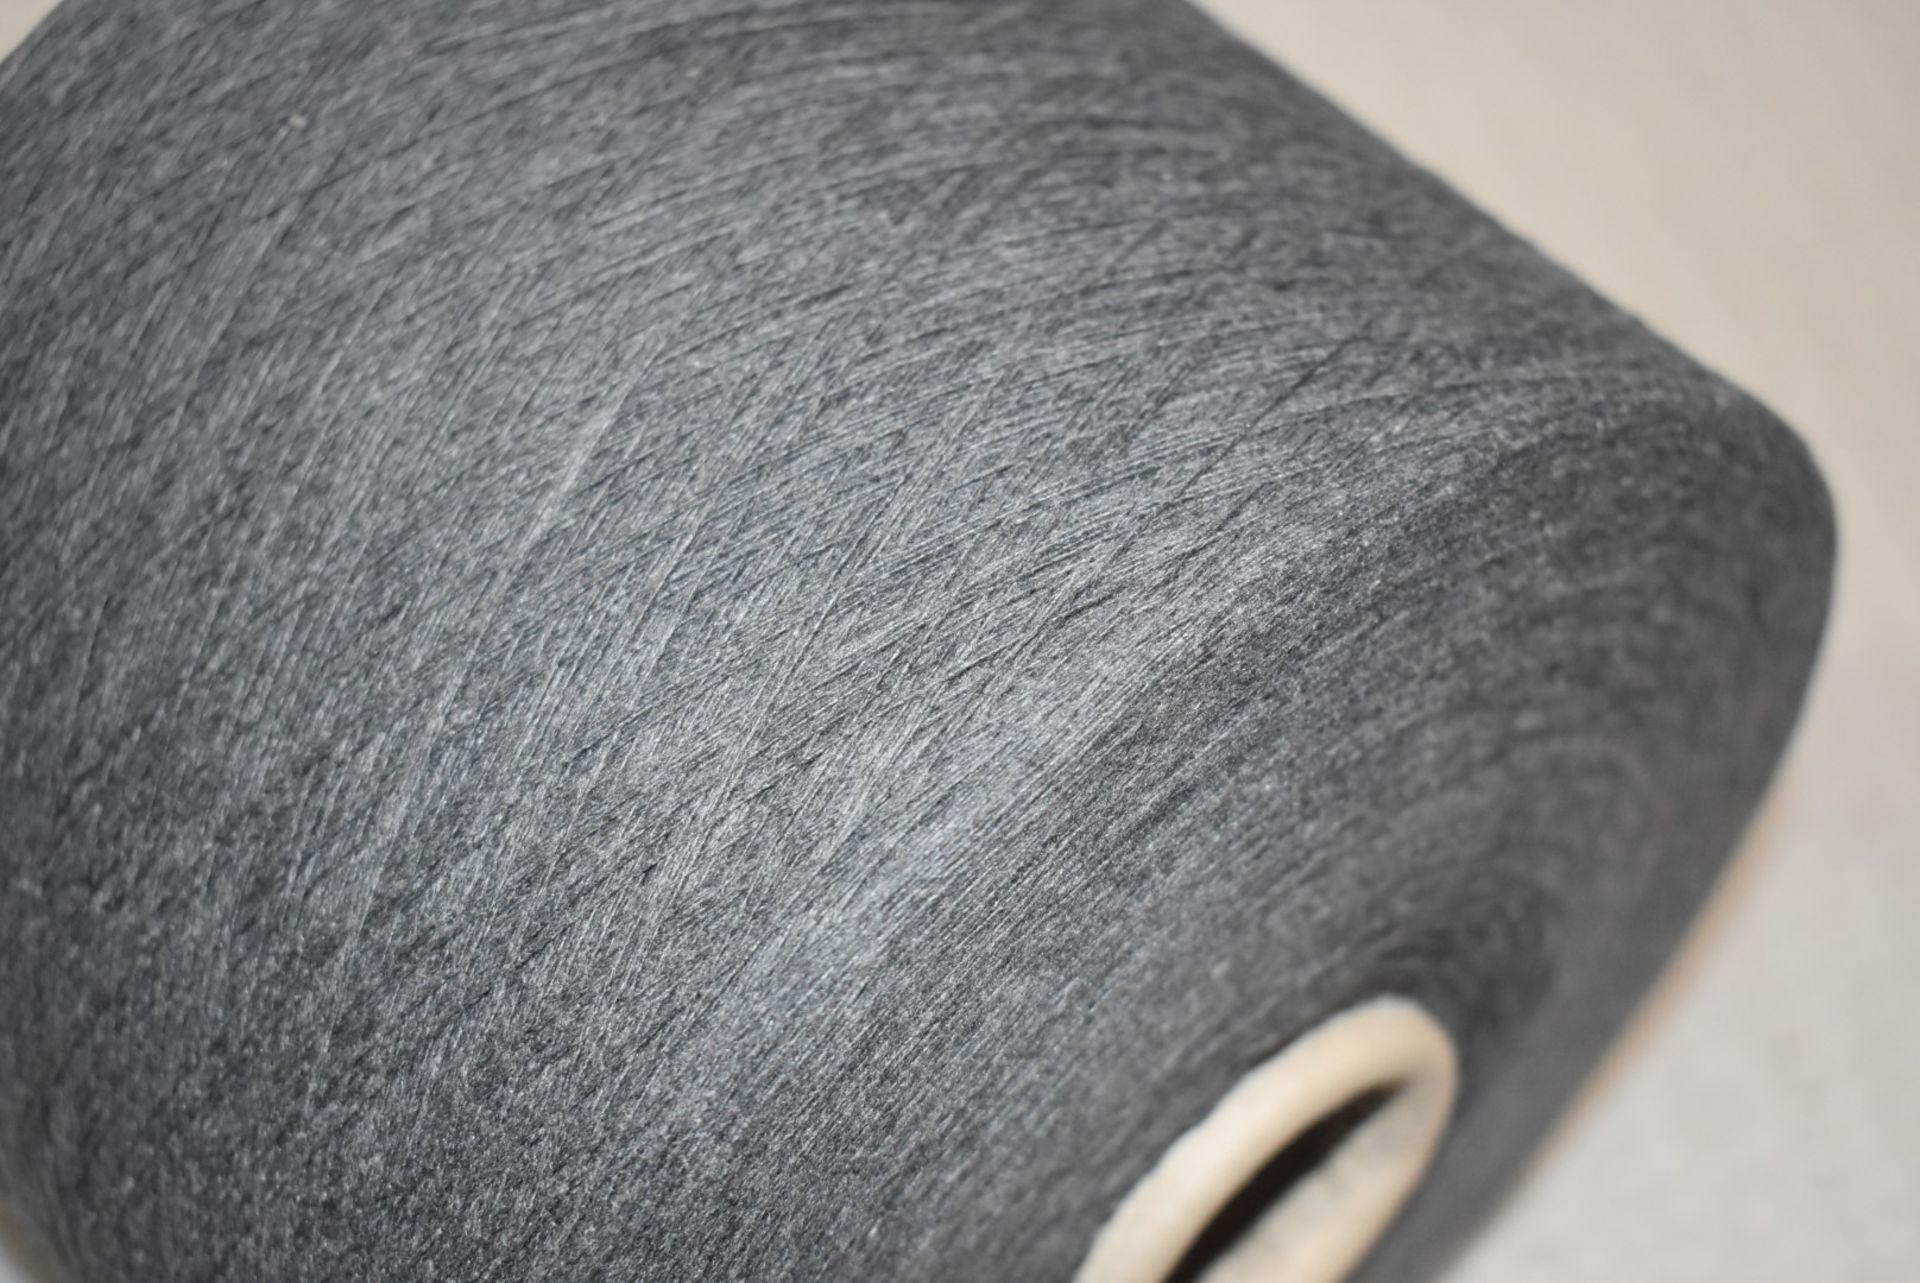 18 x Cones of 1/13 MicroCotton Knitting Yarn - Mid Grey - Approx Weight: 2,500g - New Stock ABL Yarn - Image 16 of 16